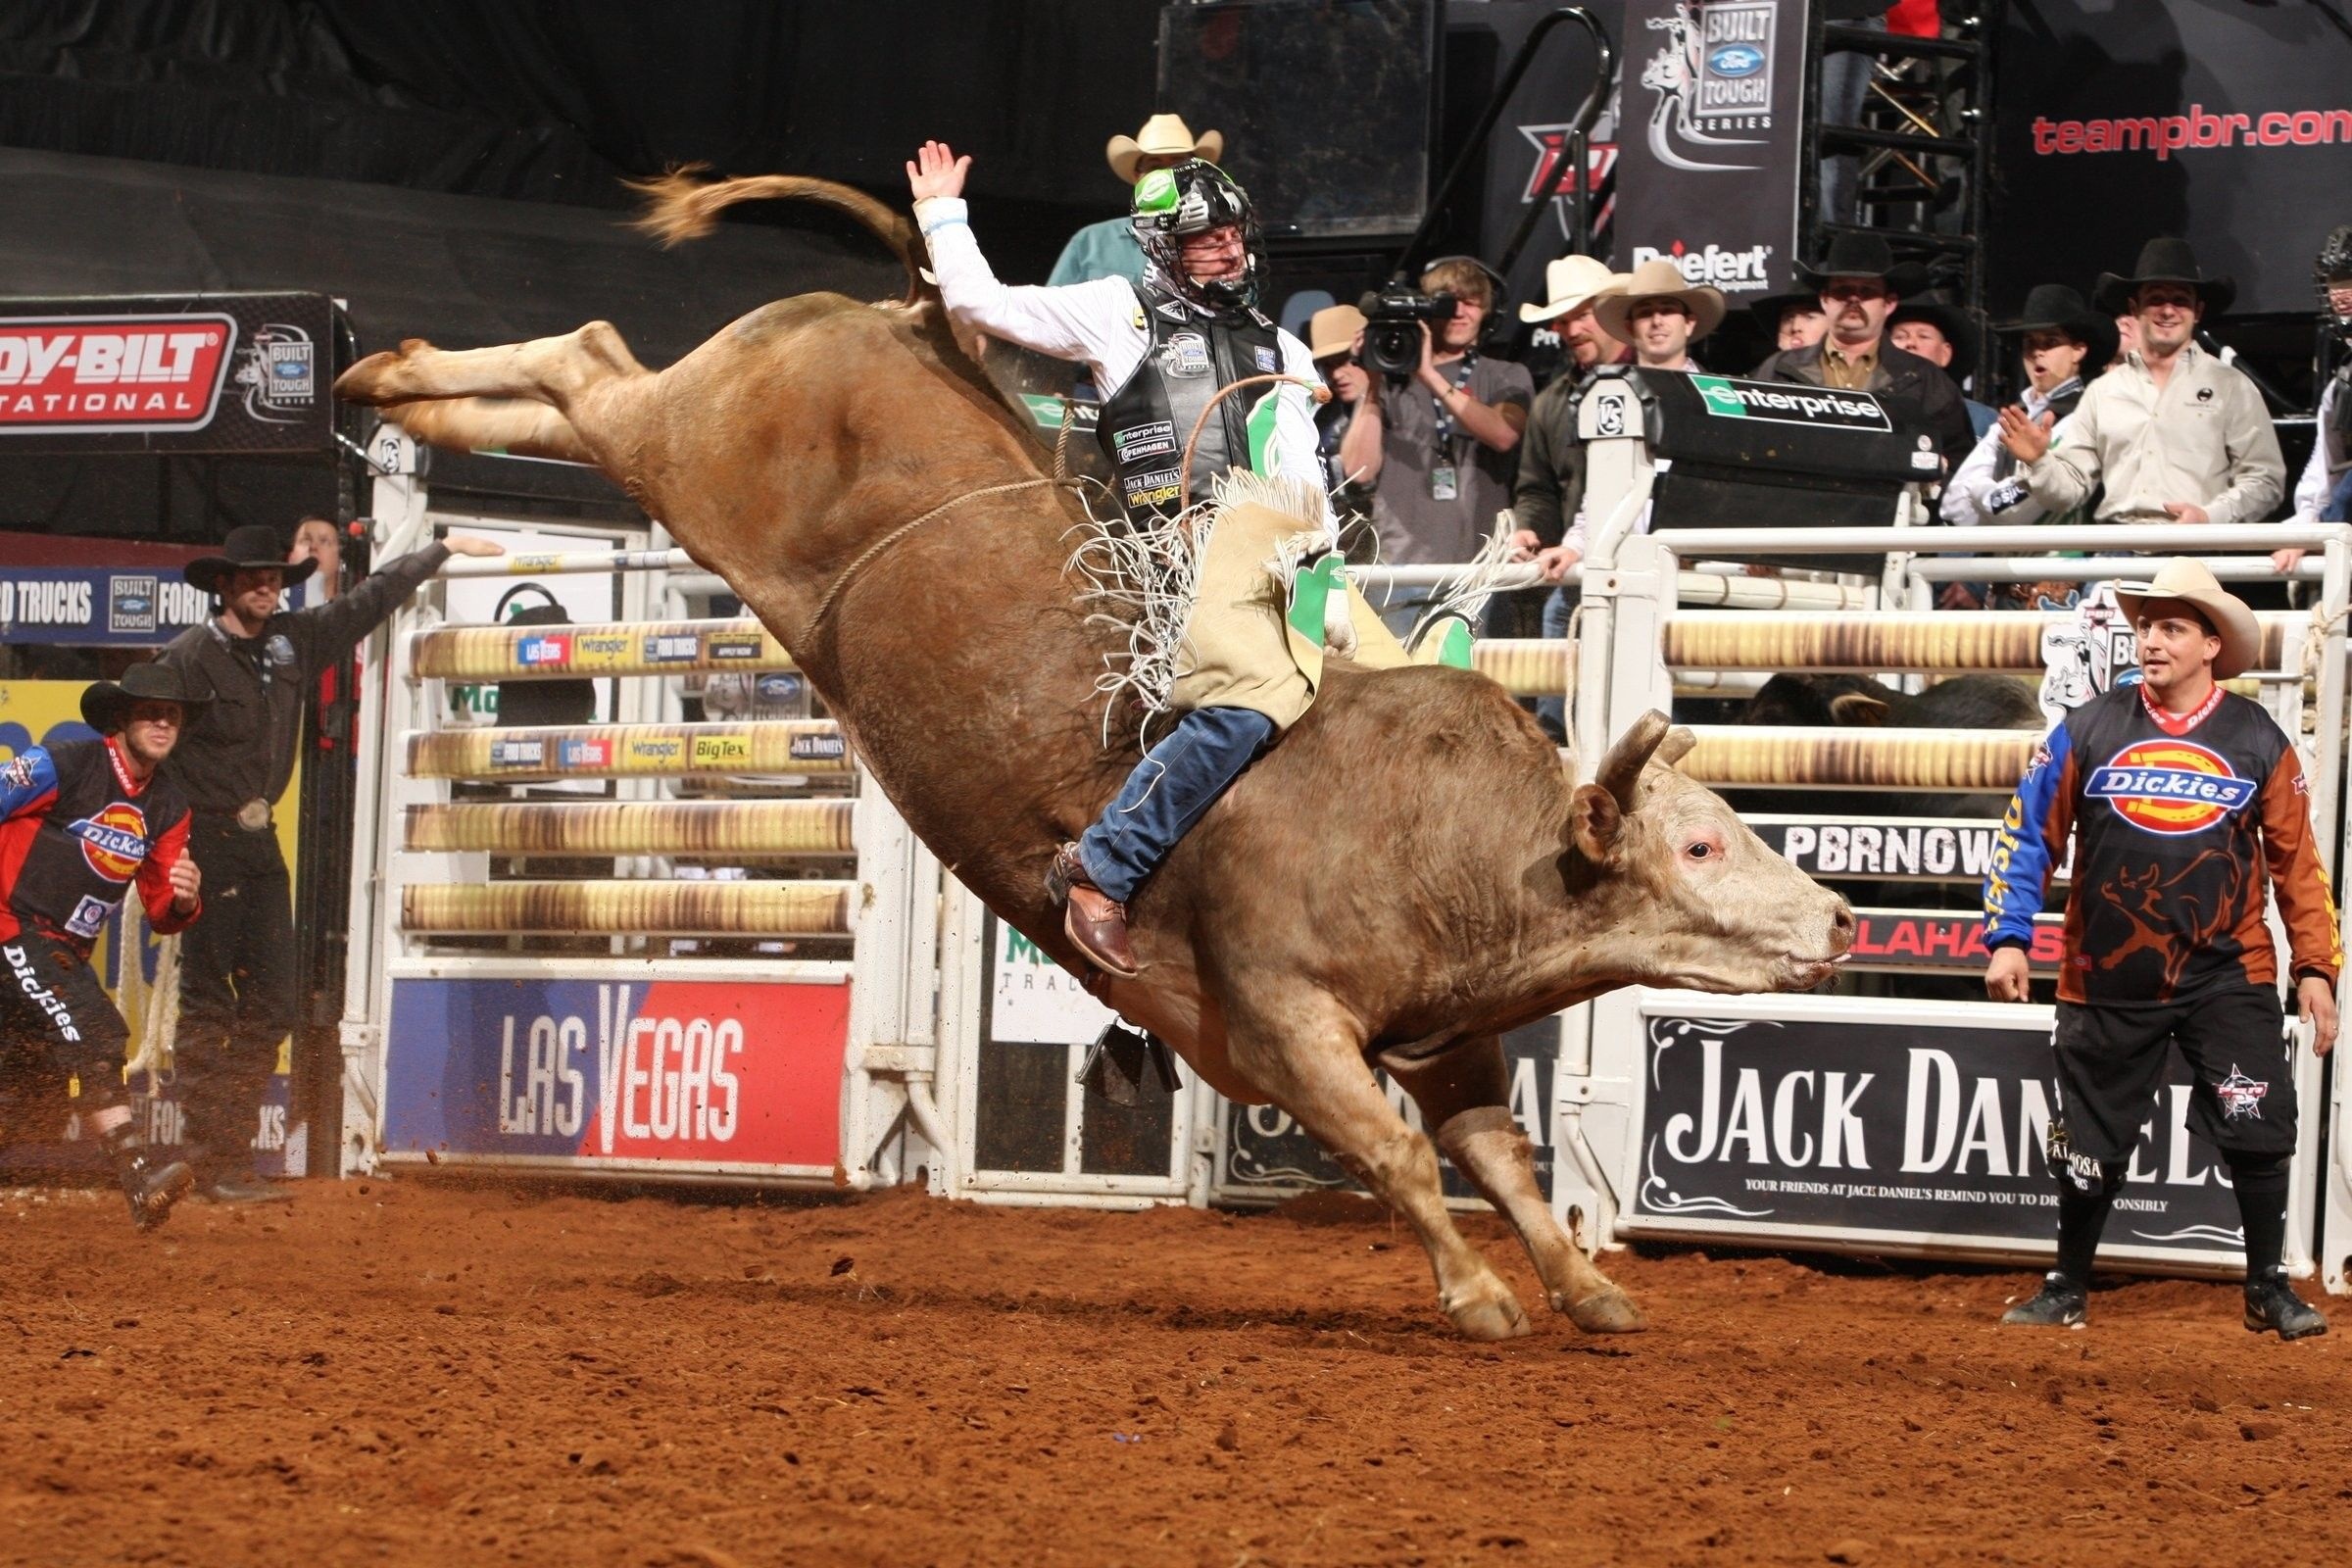 Bullriding: A rodeo sport in which the rider tries to hold on to a bucking bull, Extreme sport. 2400x1600 HD Wallpaper.